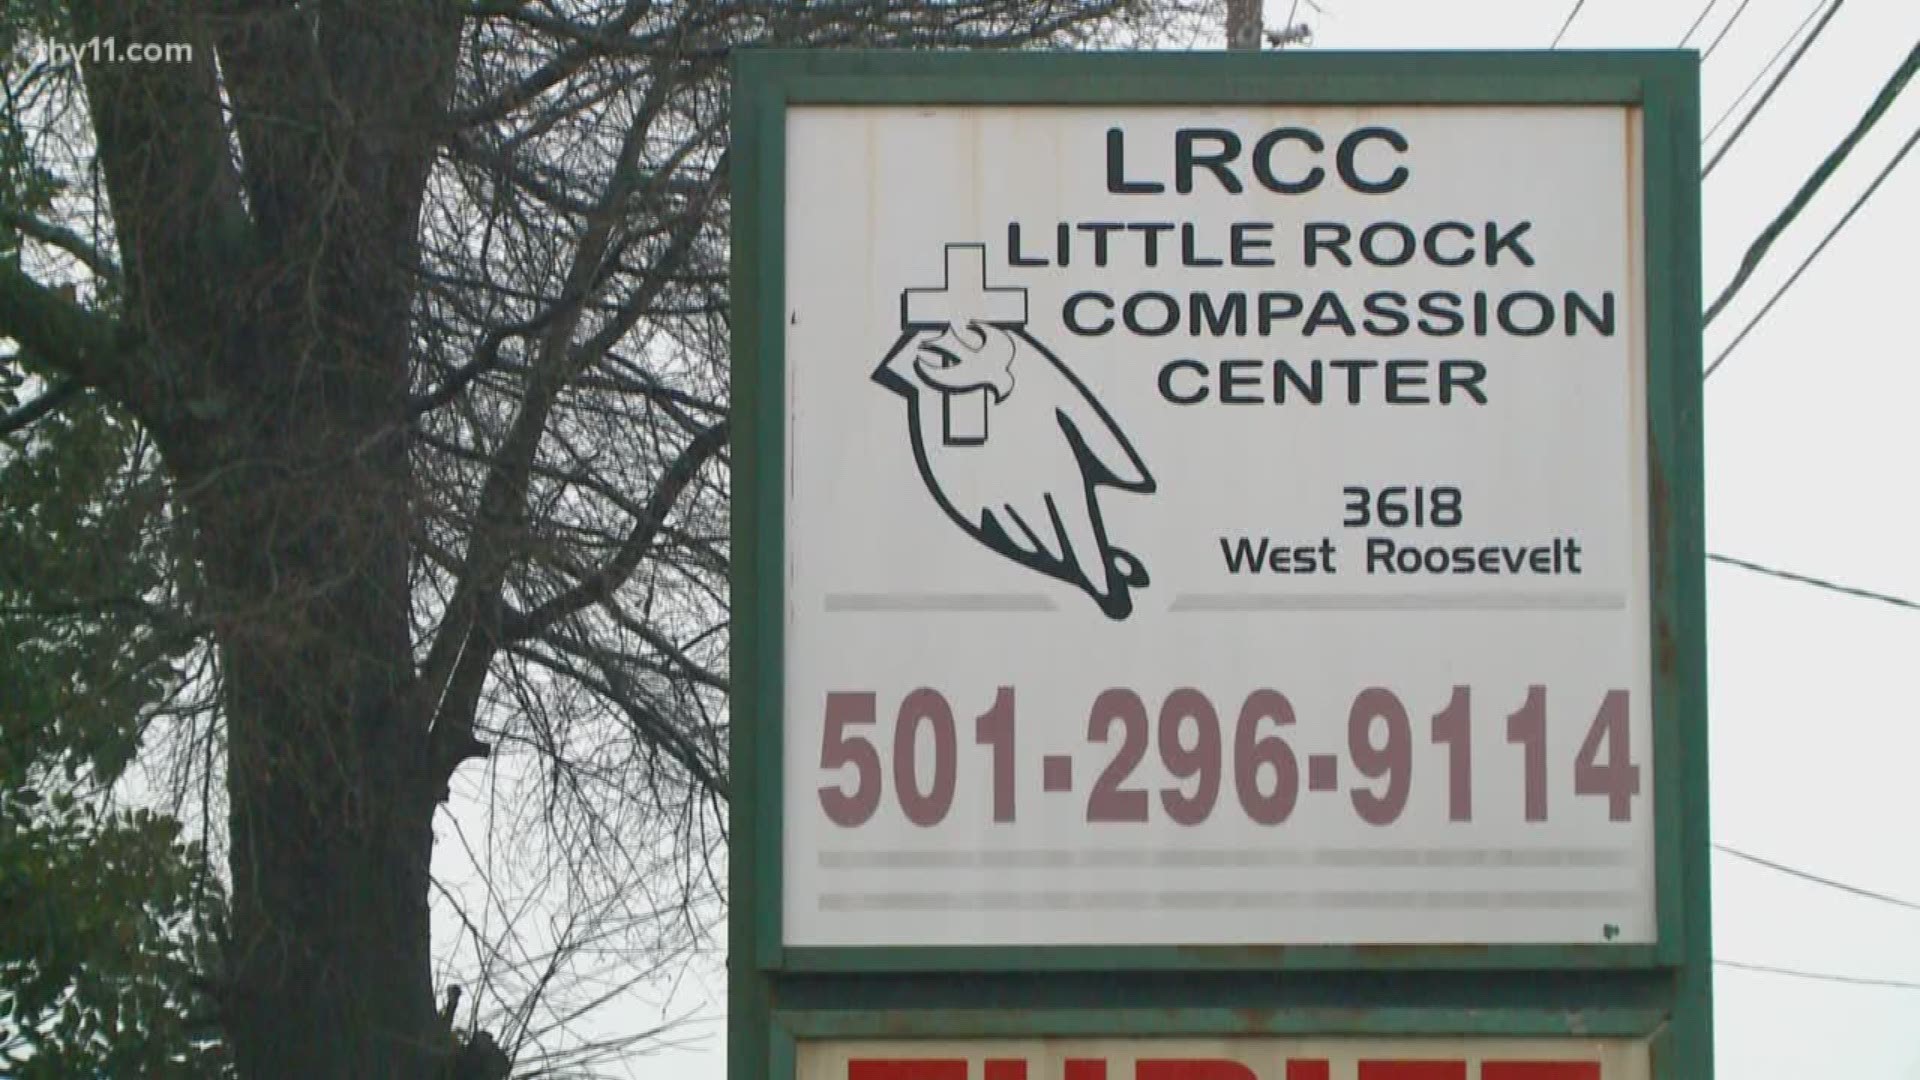 Over the last 2 decades, the Little Rock Compassion Center has helped thousands of people find homes, jobs, and better lives.